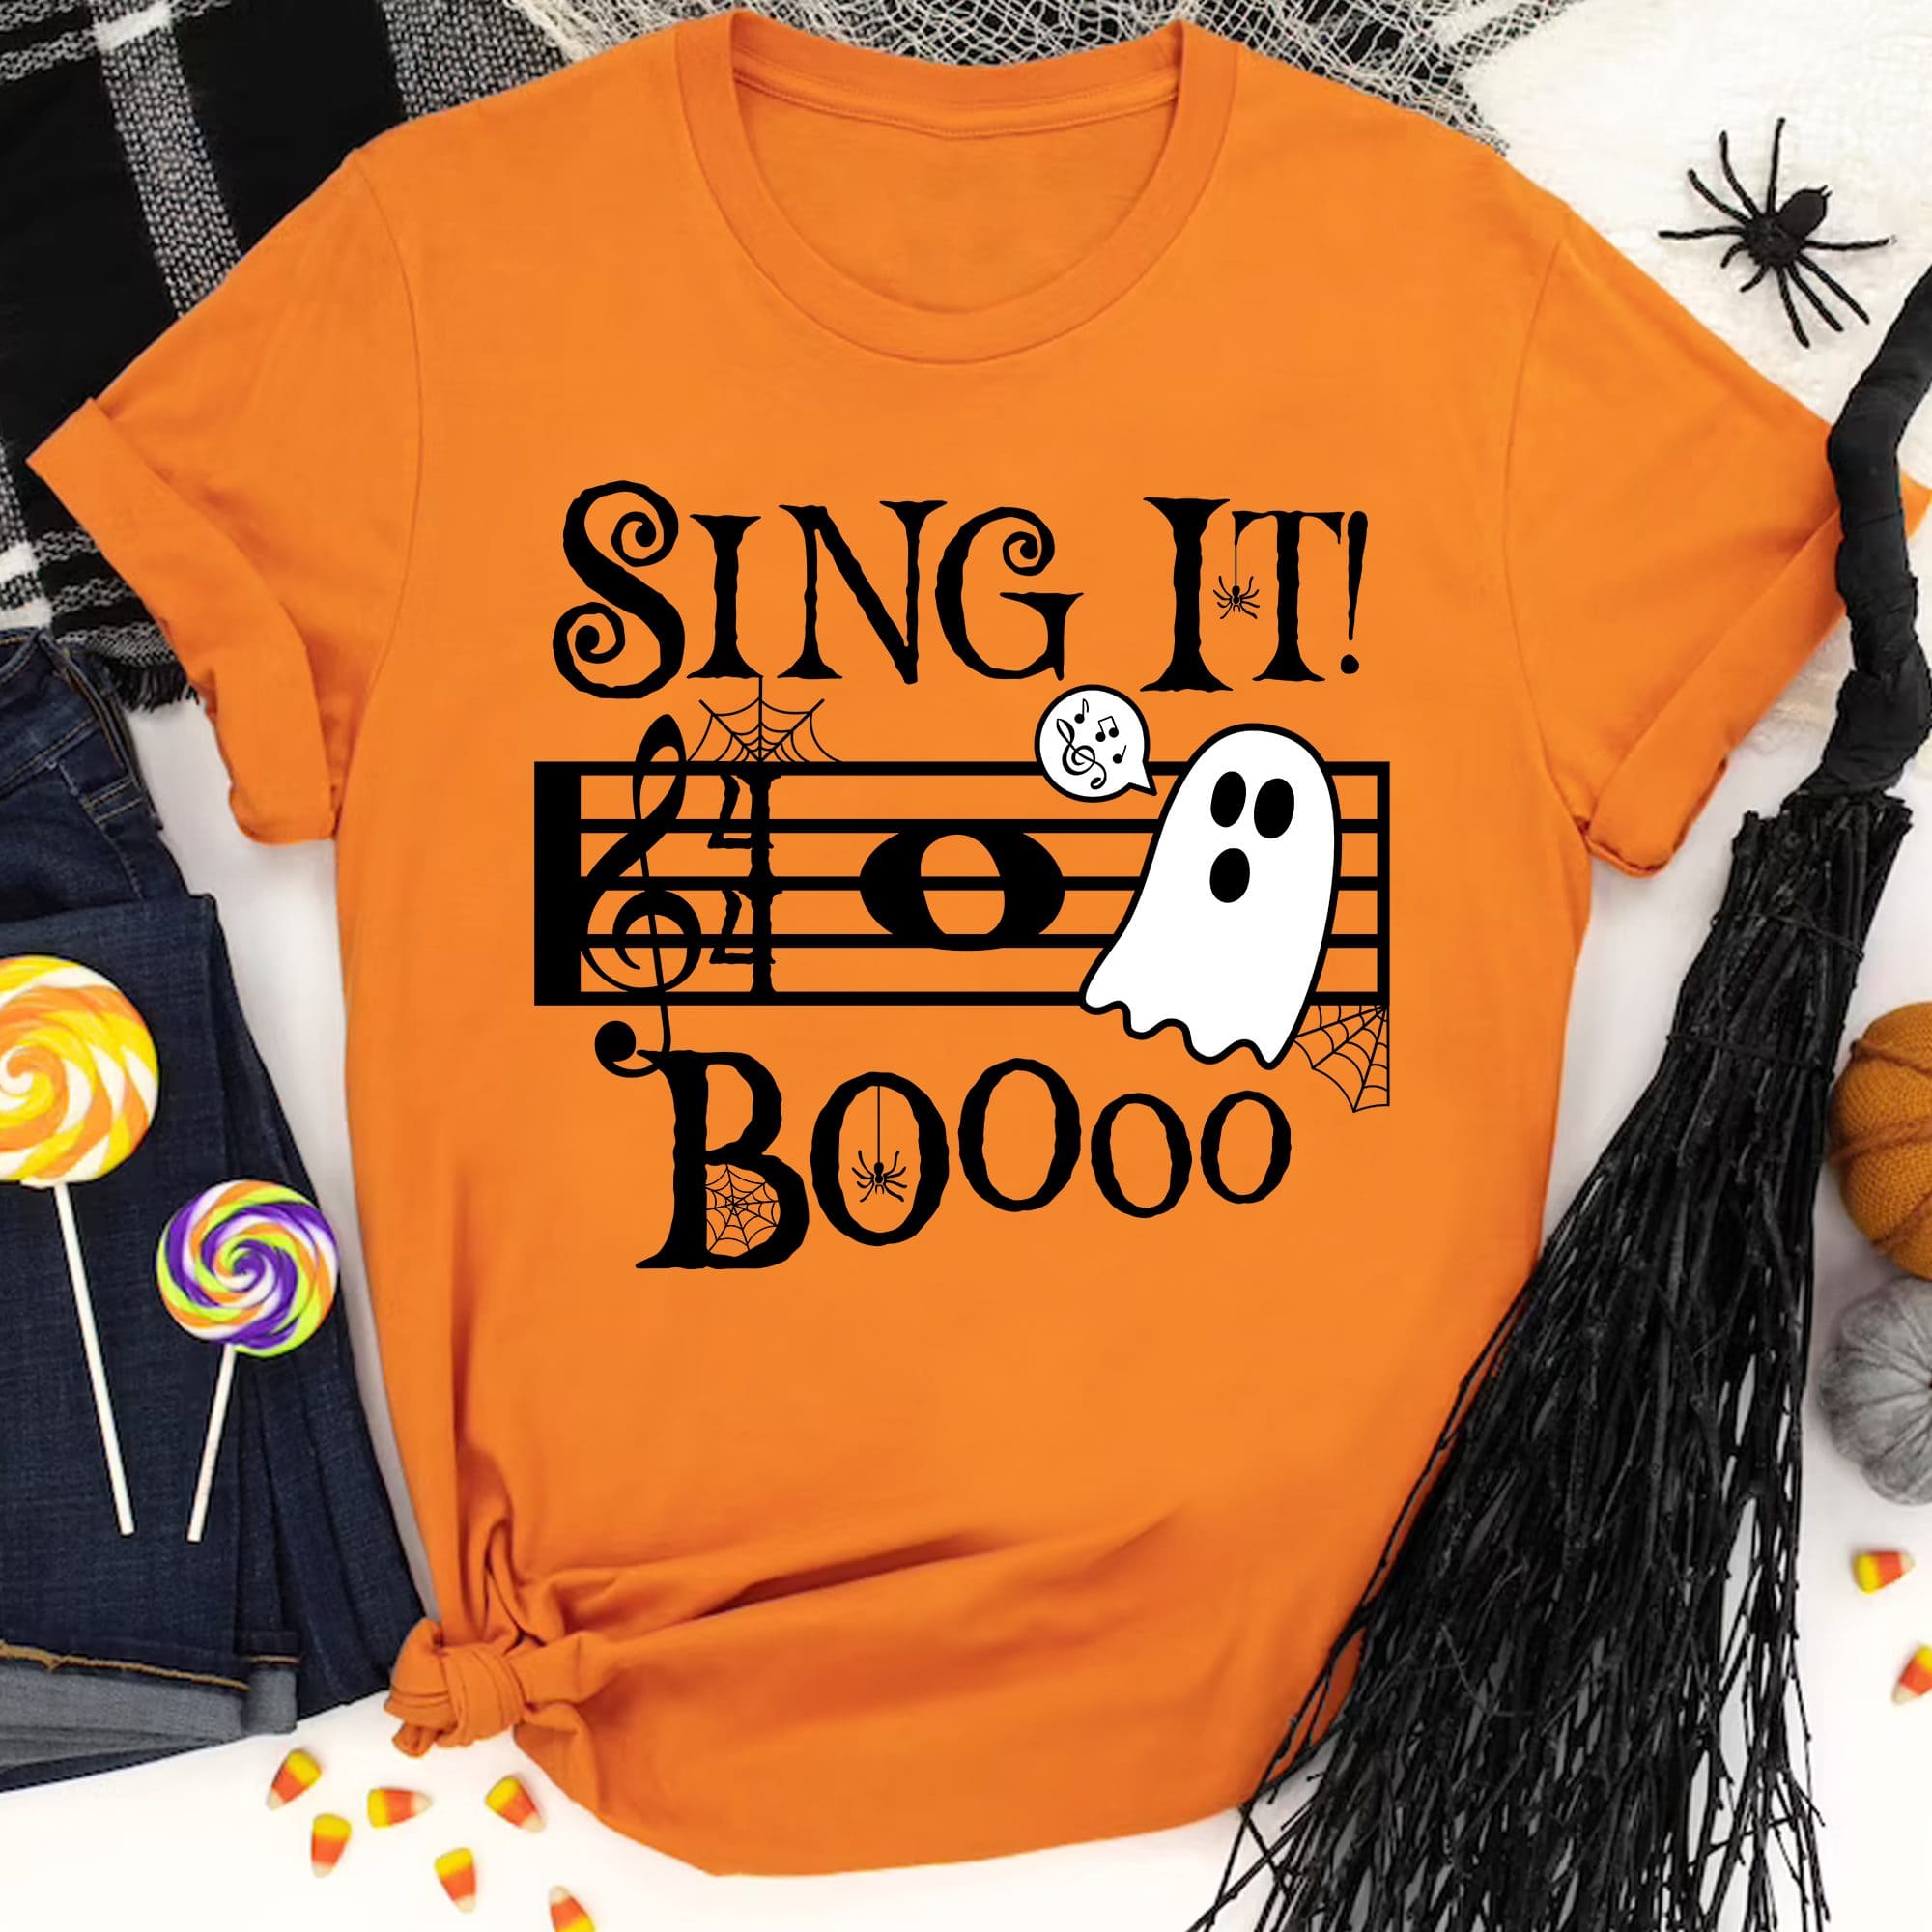 Sing it Boo - Music and white boo, Halloween white boo costume